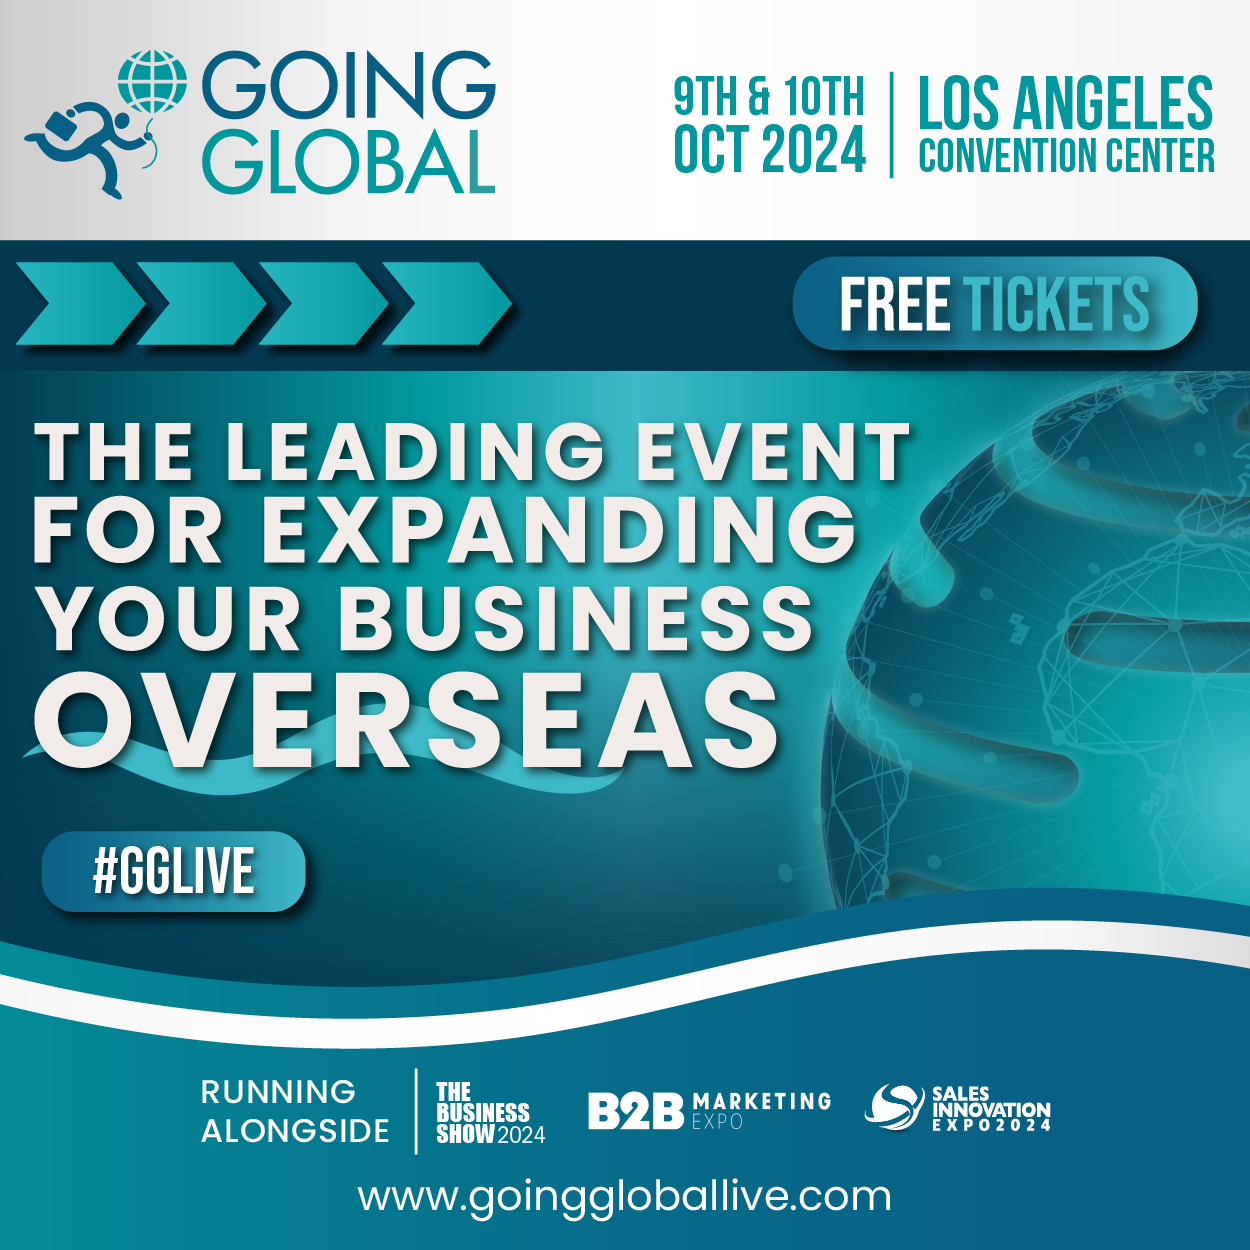 Going Global running alongside The Business Show - LA 2024 organized by Business Show Media